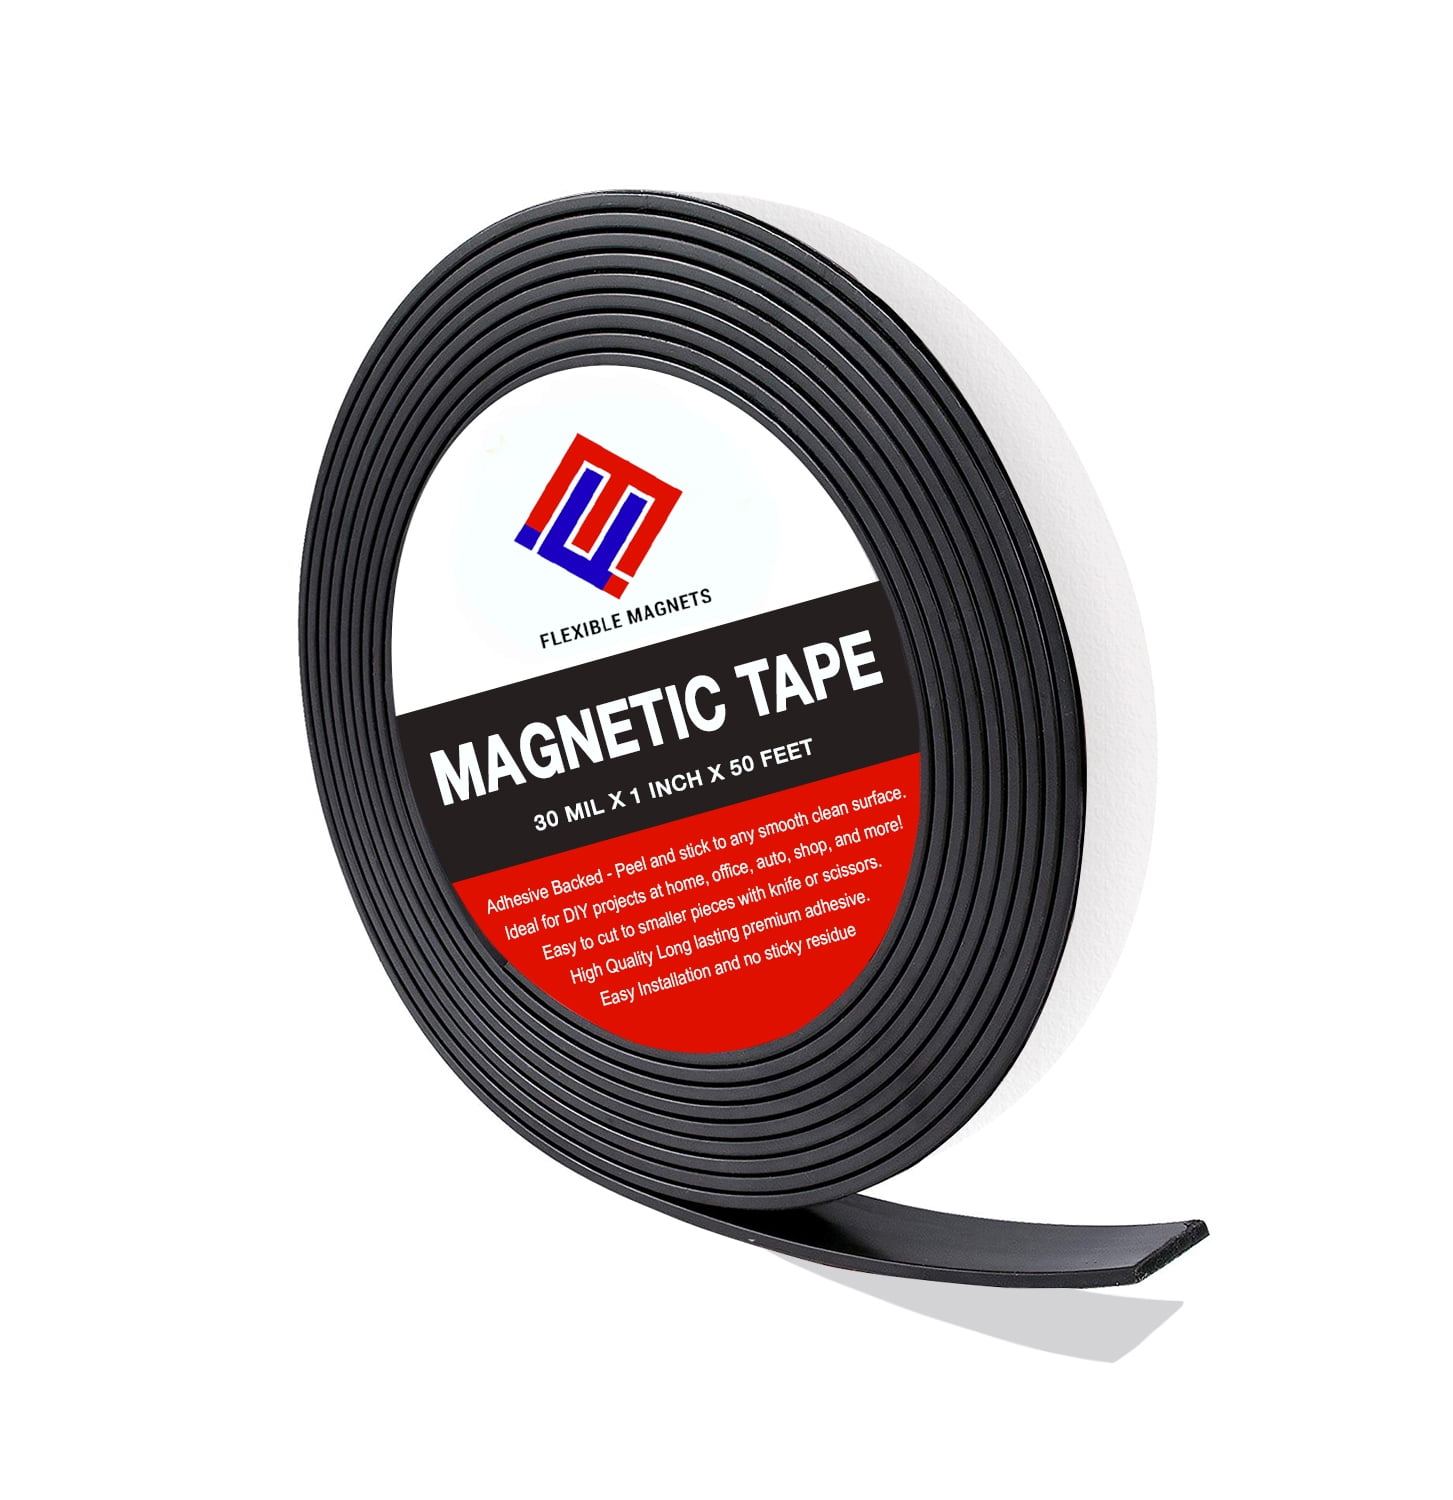 Flexible Magnets New 10 Feet Adhesive Magnetic Strip 2 wide Adhesive Back 30 Mil thick. 